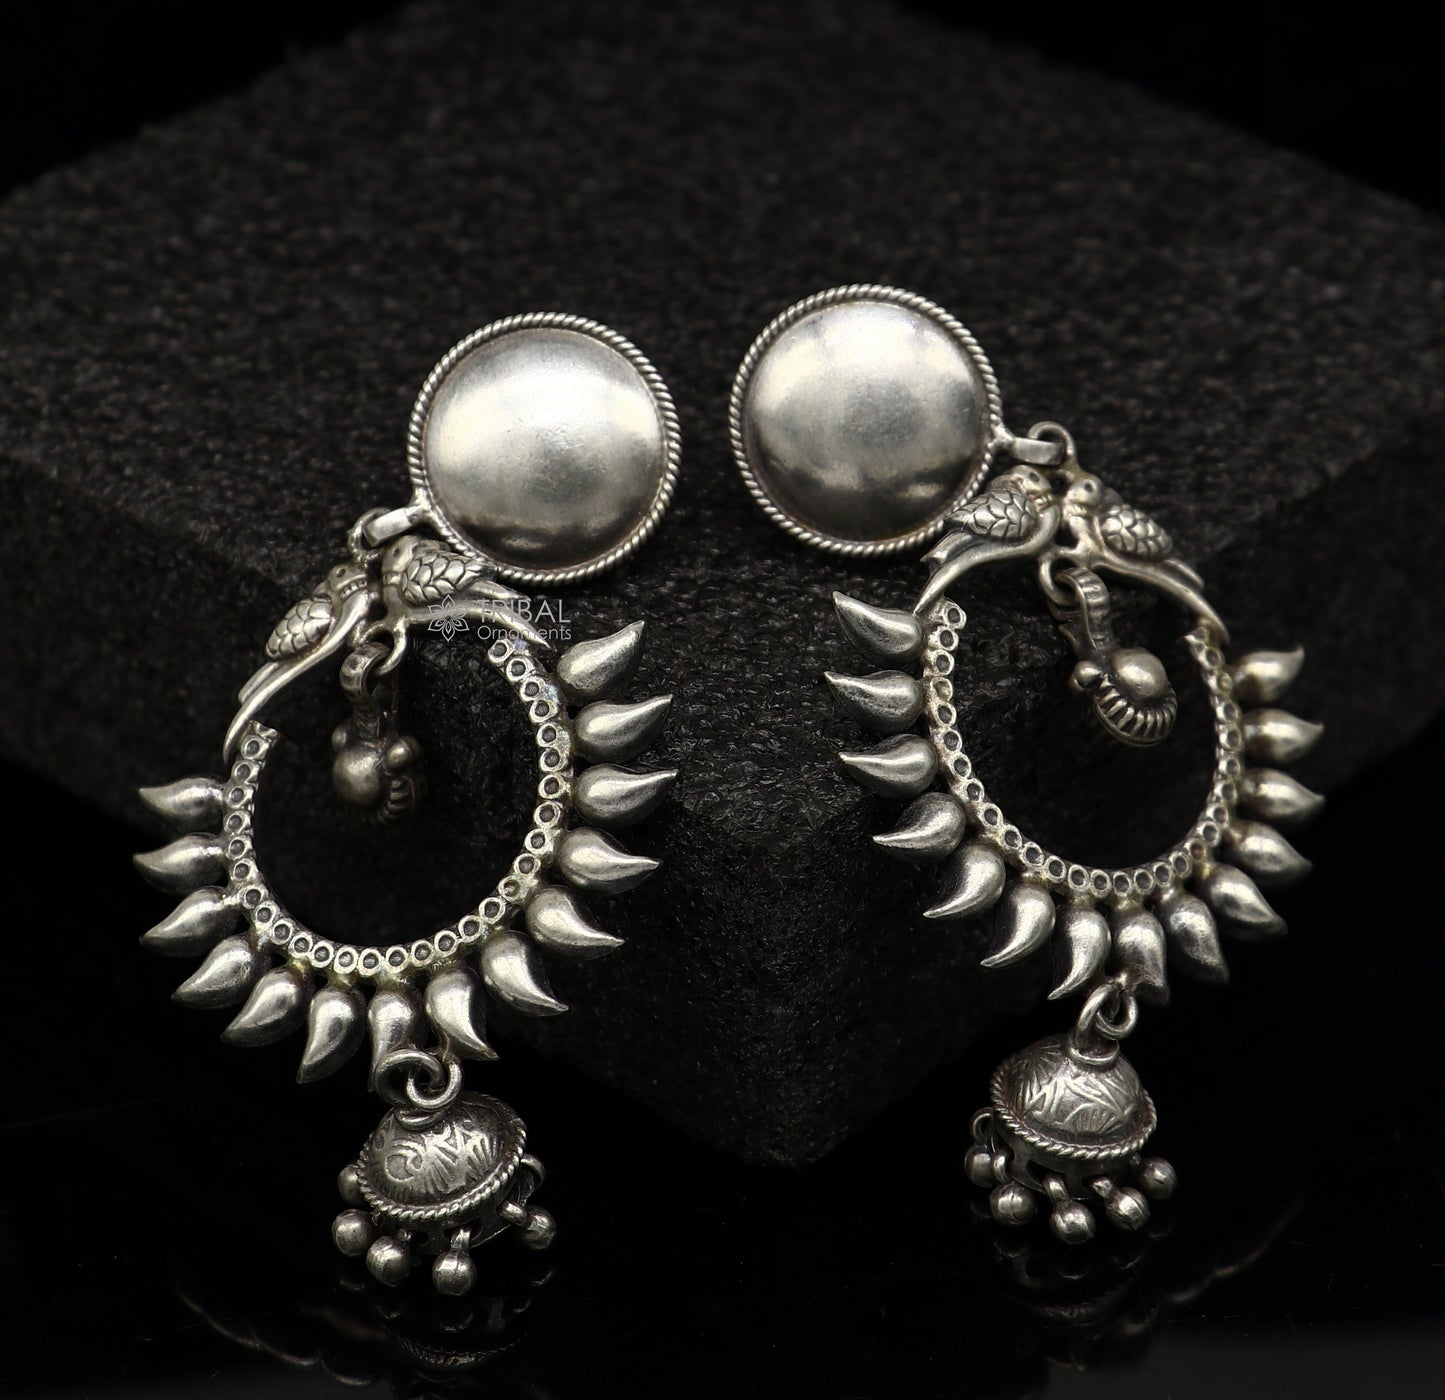 Cultural silver earrings, fashionable and versatile floral silver dangles an intricate ethnic pattern made by 925 sterling silver s1231 - TRIBAL ORNAMENTS